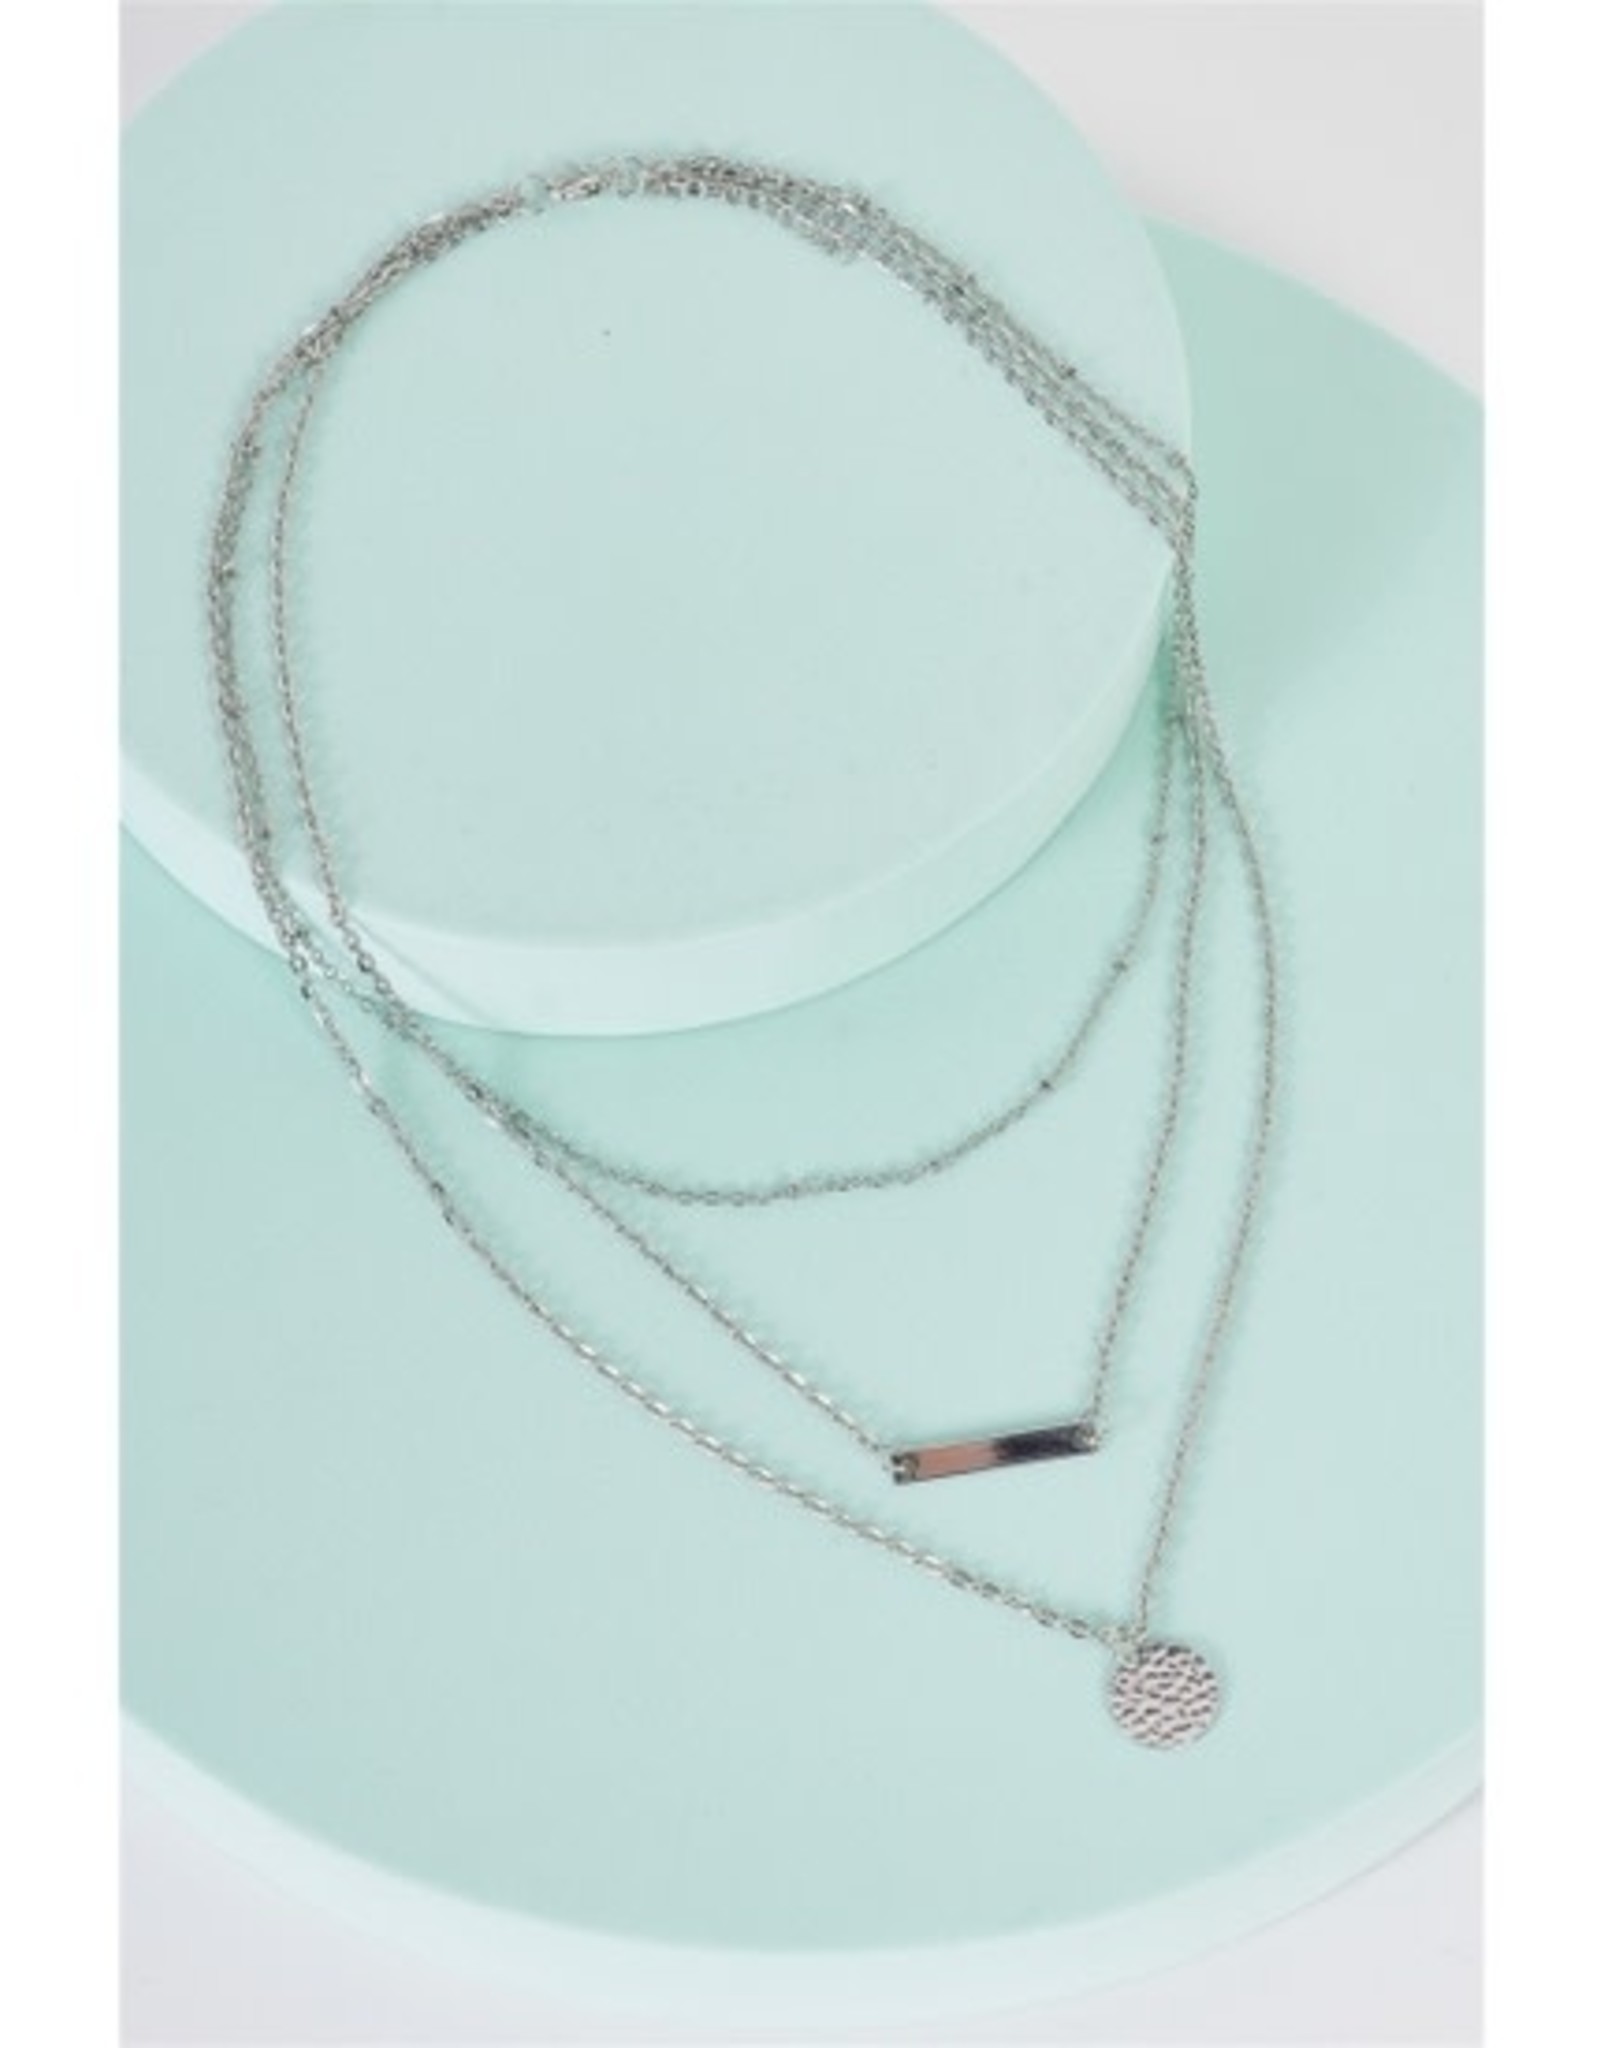 Triple Layered Double Pendant Chain Necklace